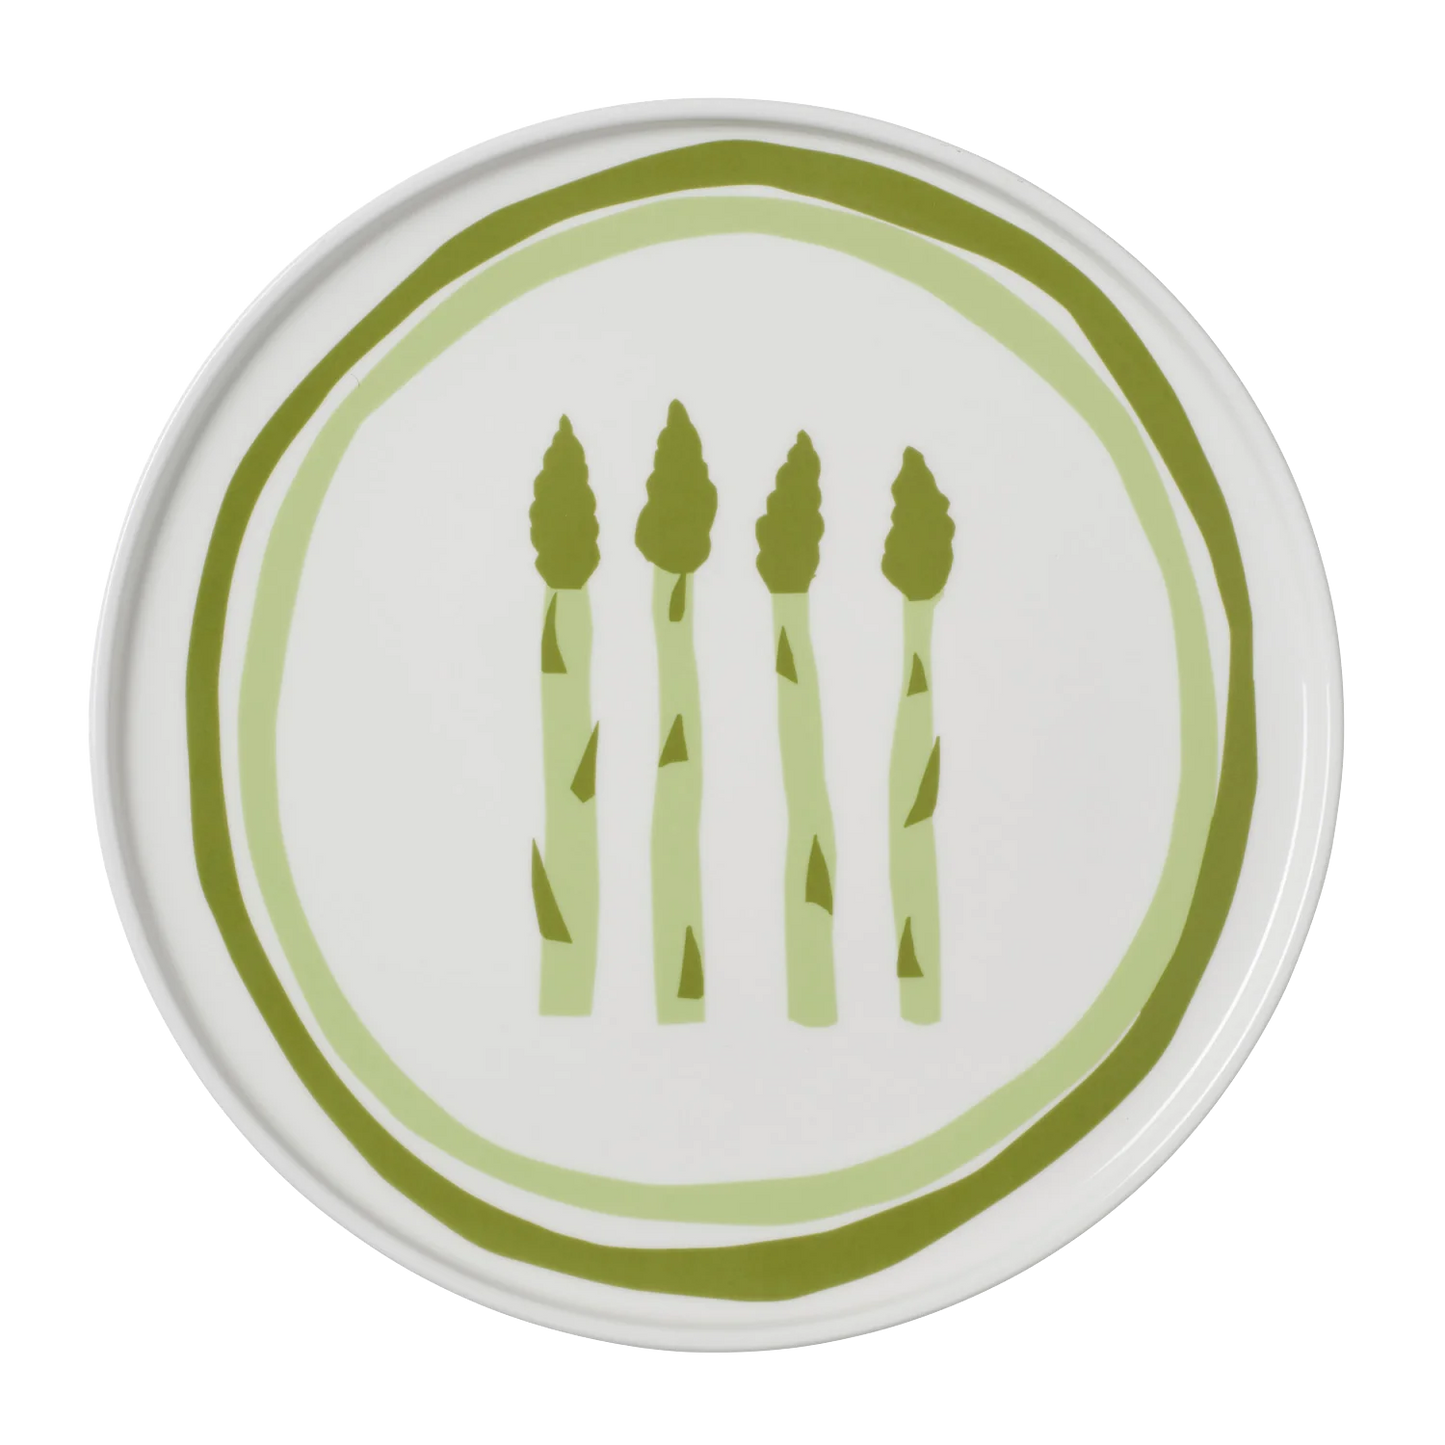 Asparagus Plate - CLICK & COLLECT ONLY